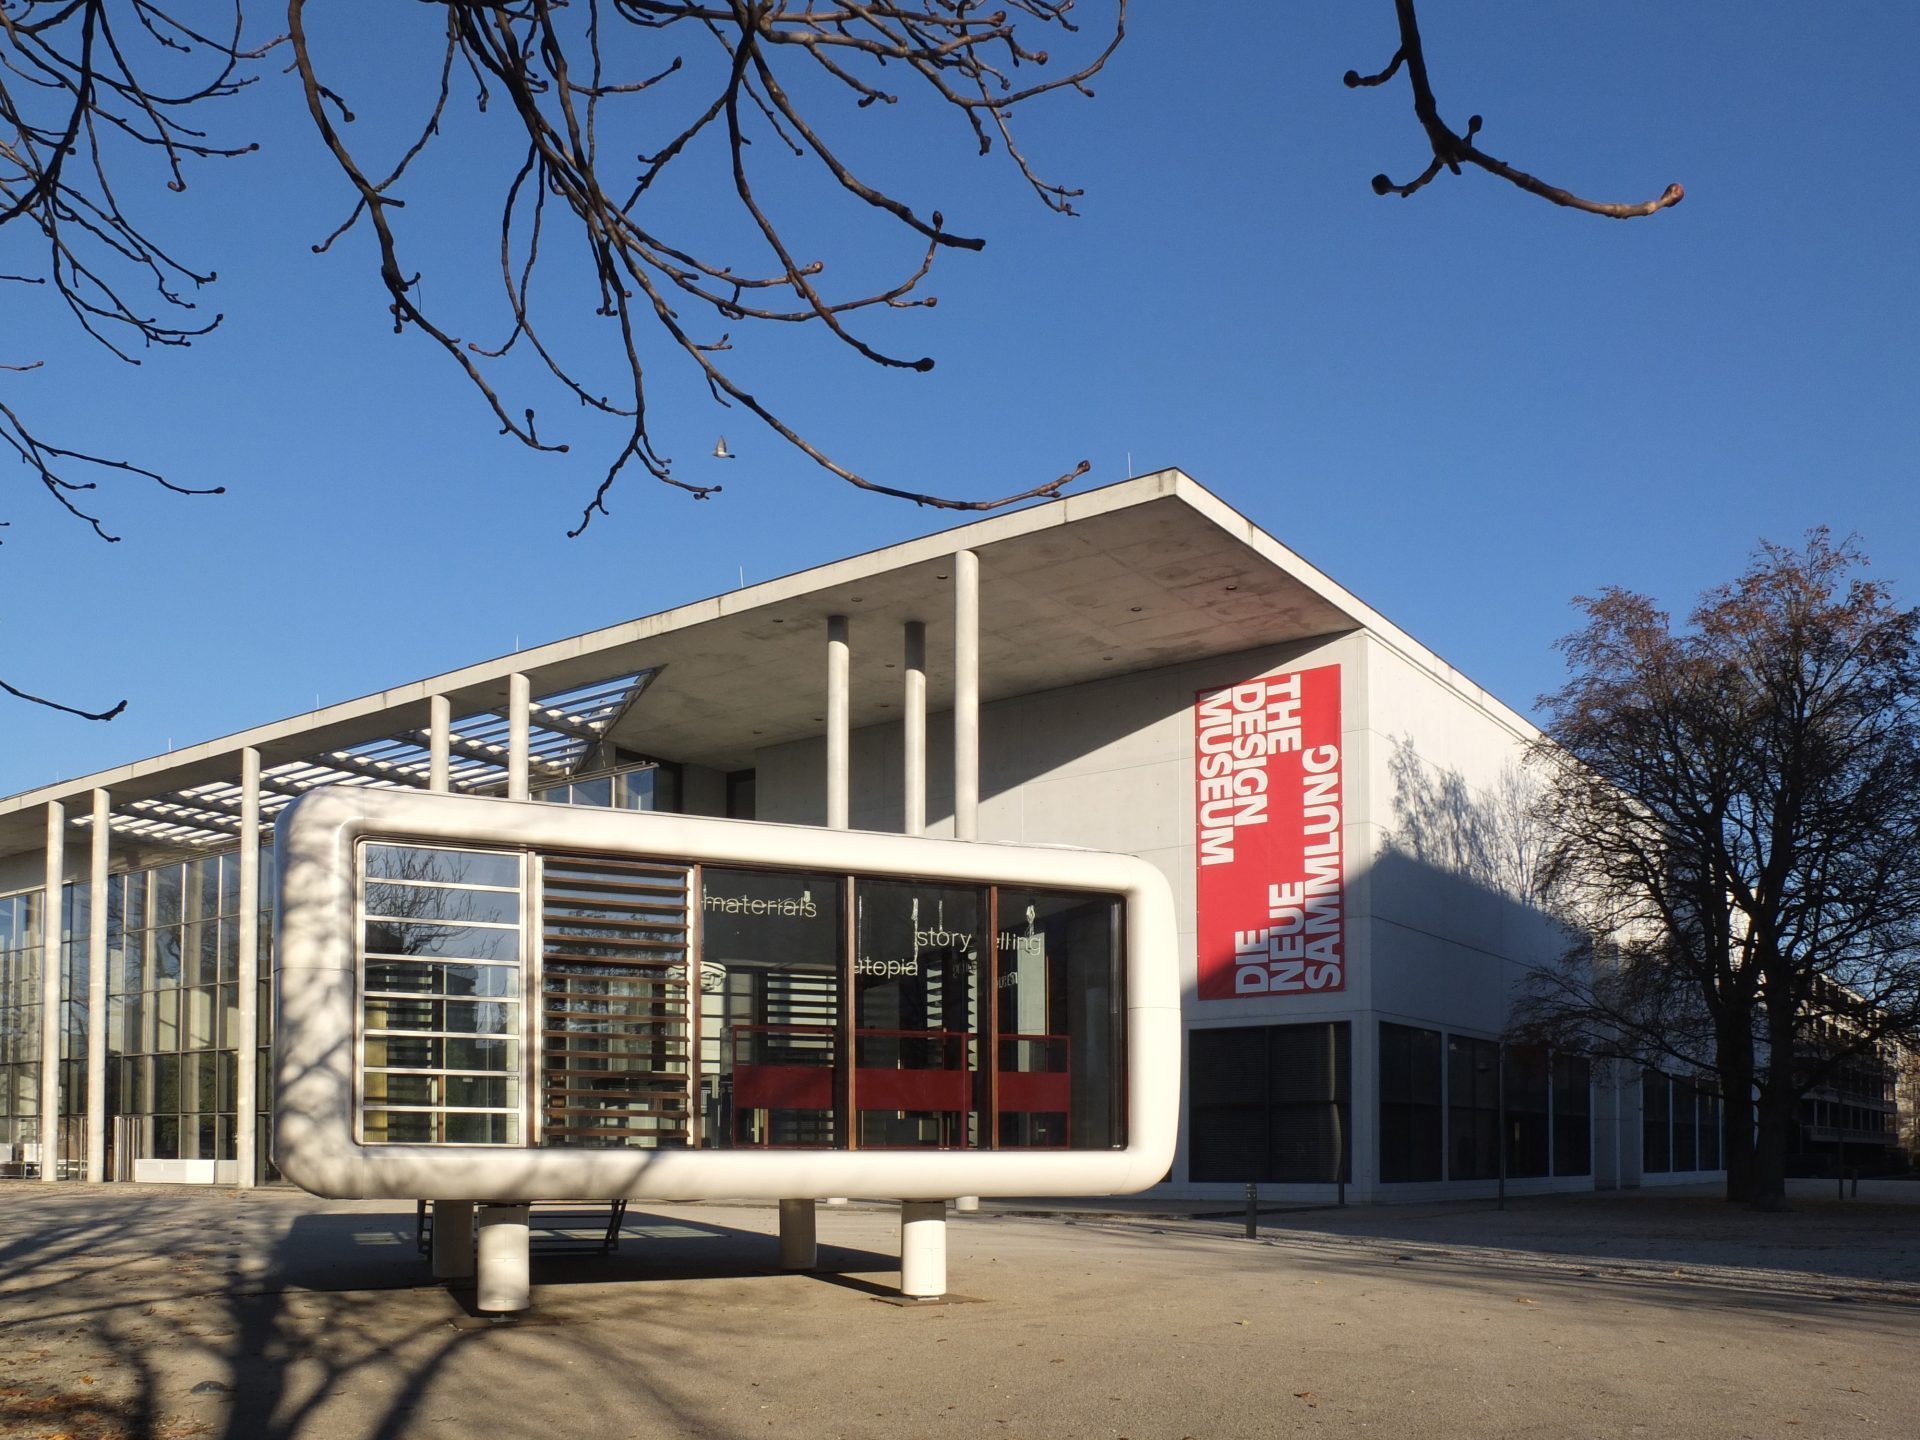 Exterior shot with a view of the Loftcube and the entrance area of the Pinakothek der Moderne. The Loftcube is a cuboid with rounded corners. The walls are made of glass, the cladding is white. It stands on four cylindrical legs.